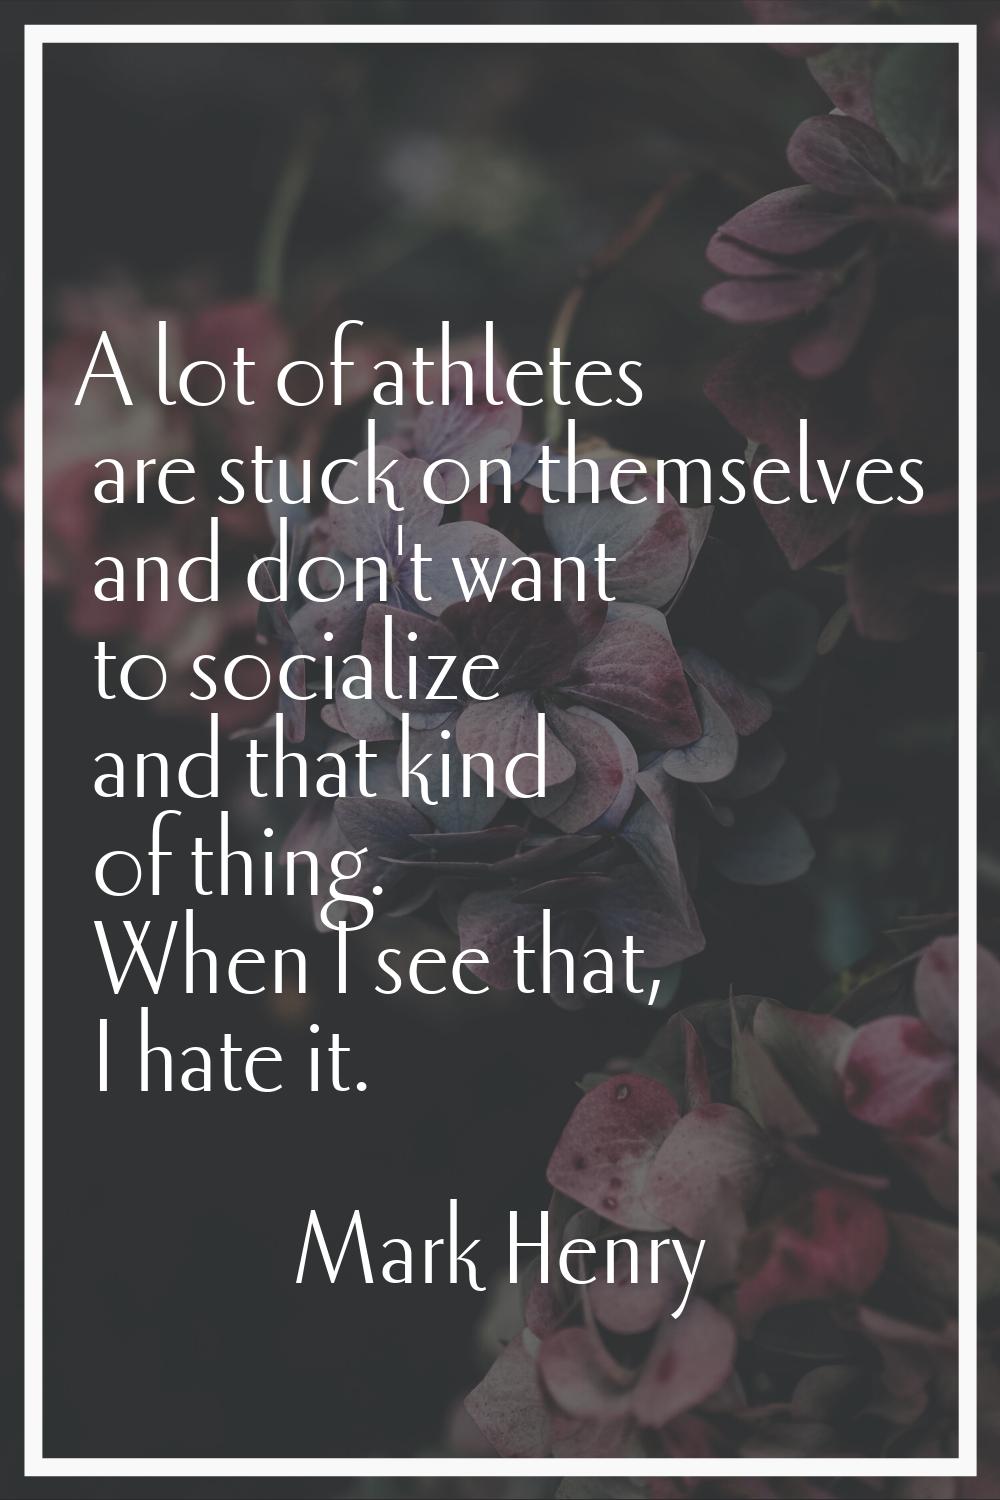 A lot of athletes are stuck on themselves and don't want to socialize and that kind of thing. When 